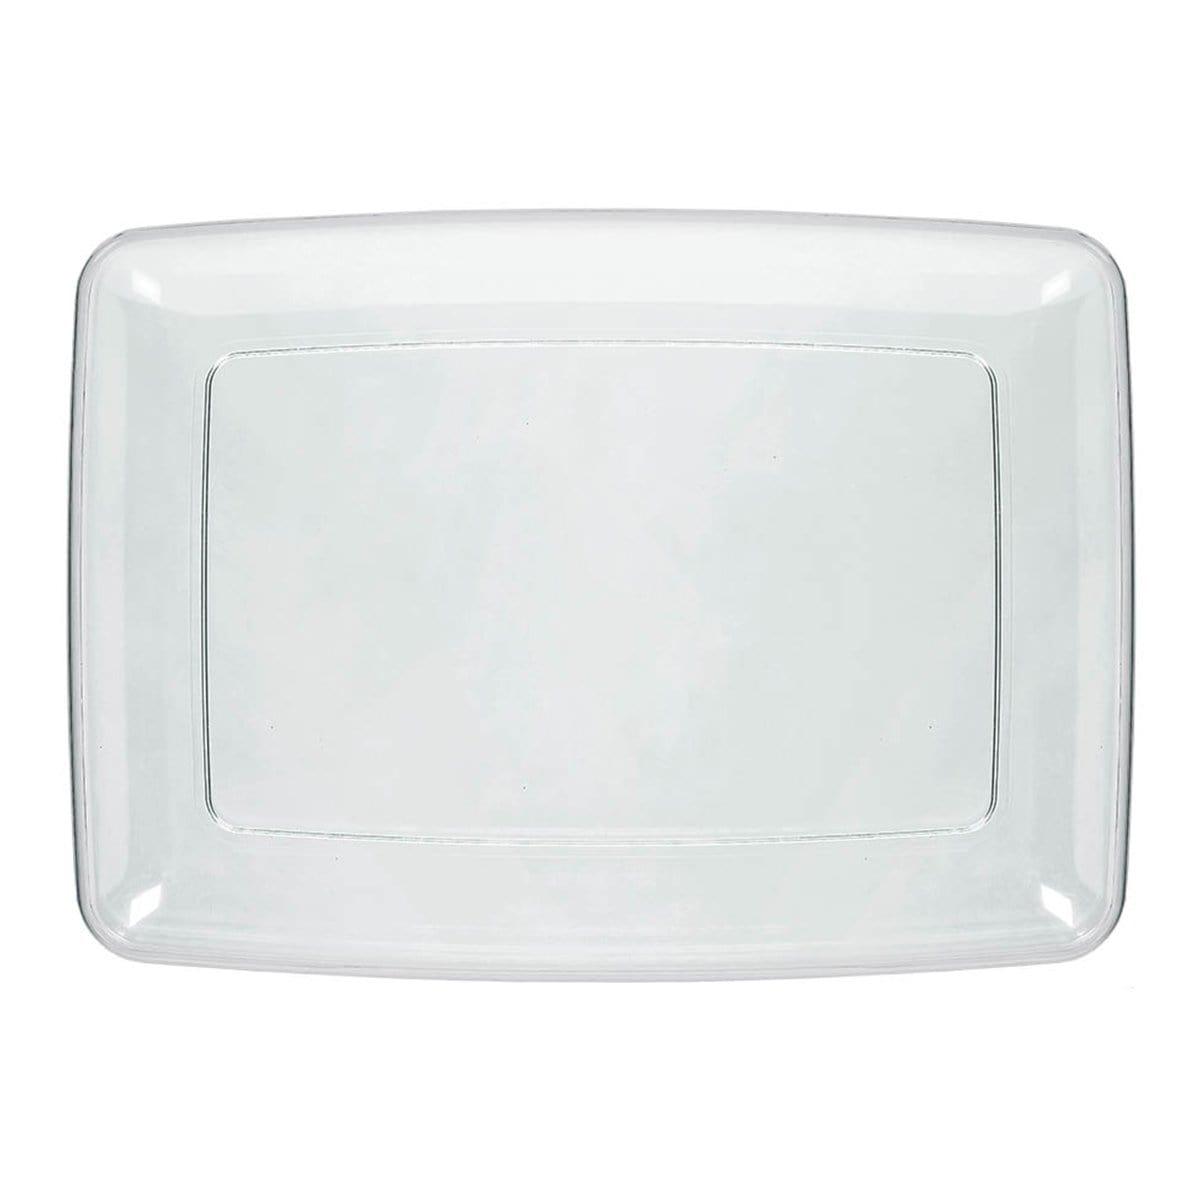 Buy Plasticware Rectangular Serving Tray - Clear sold at Party Expert